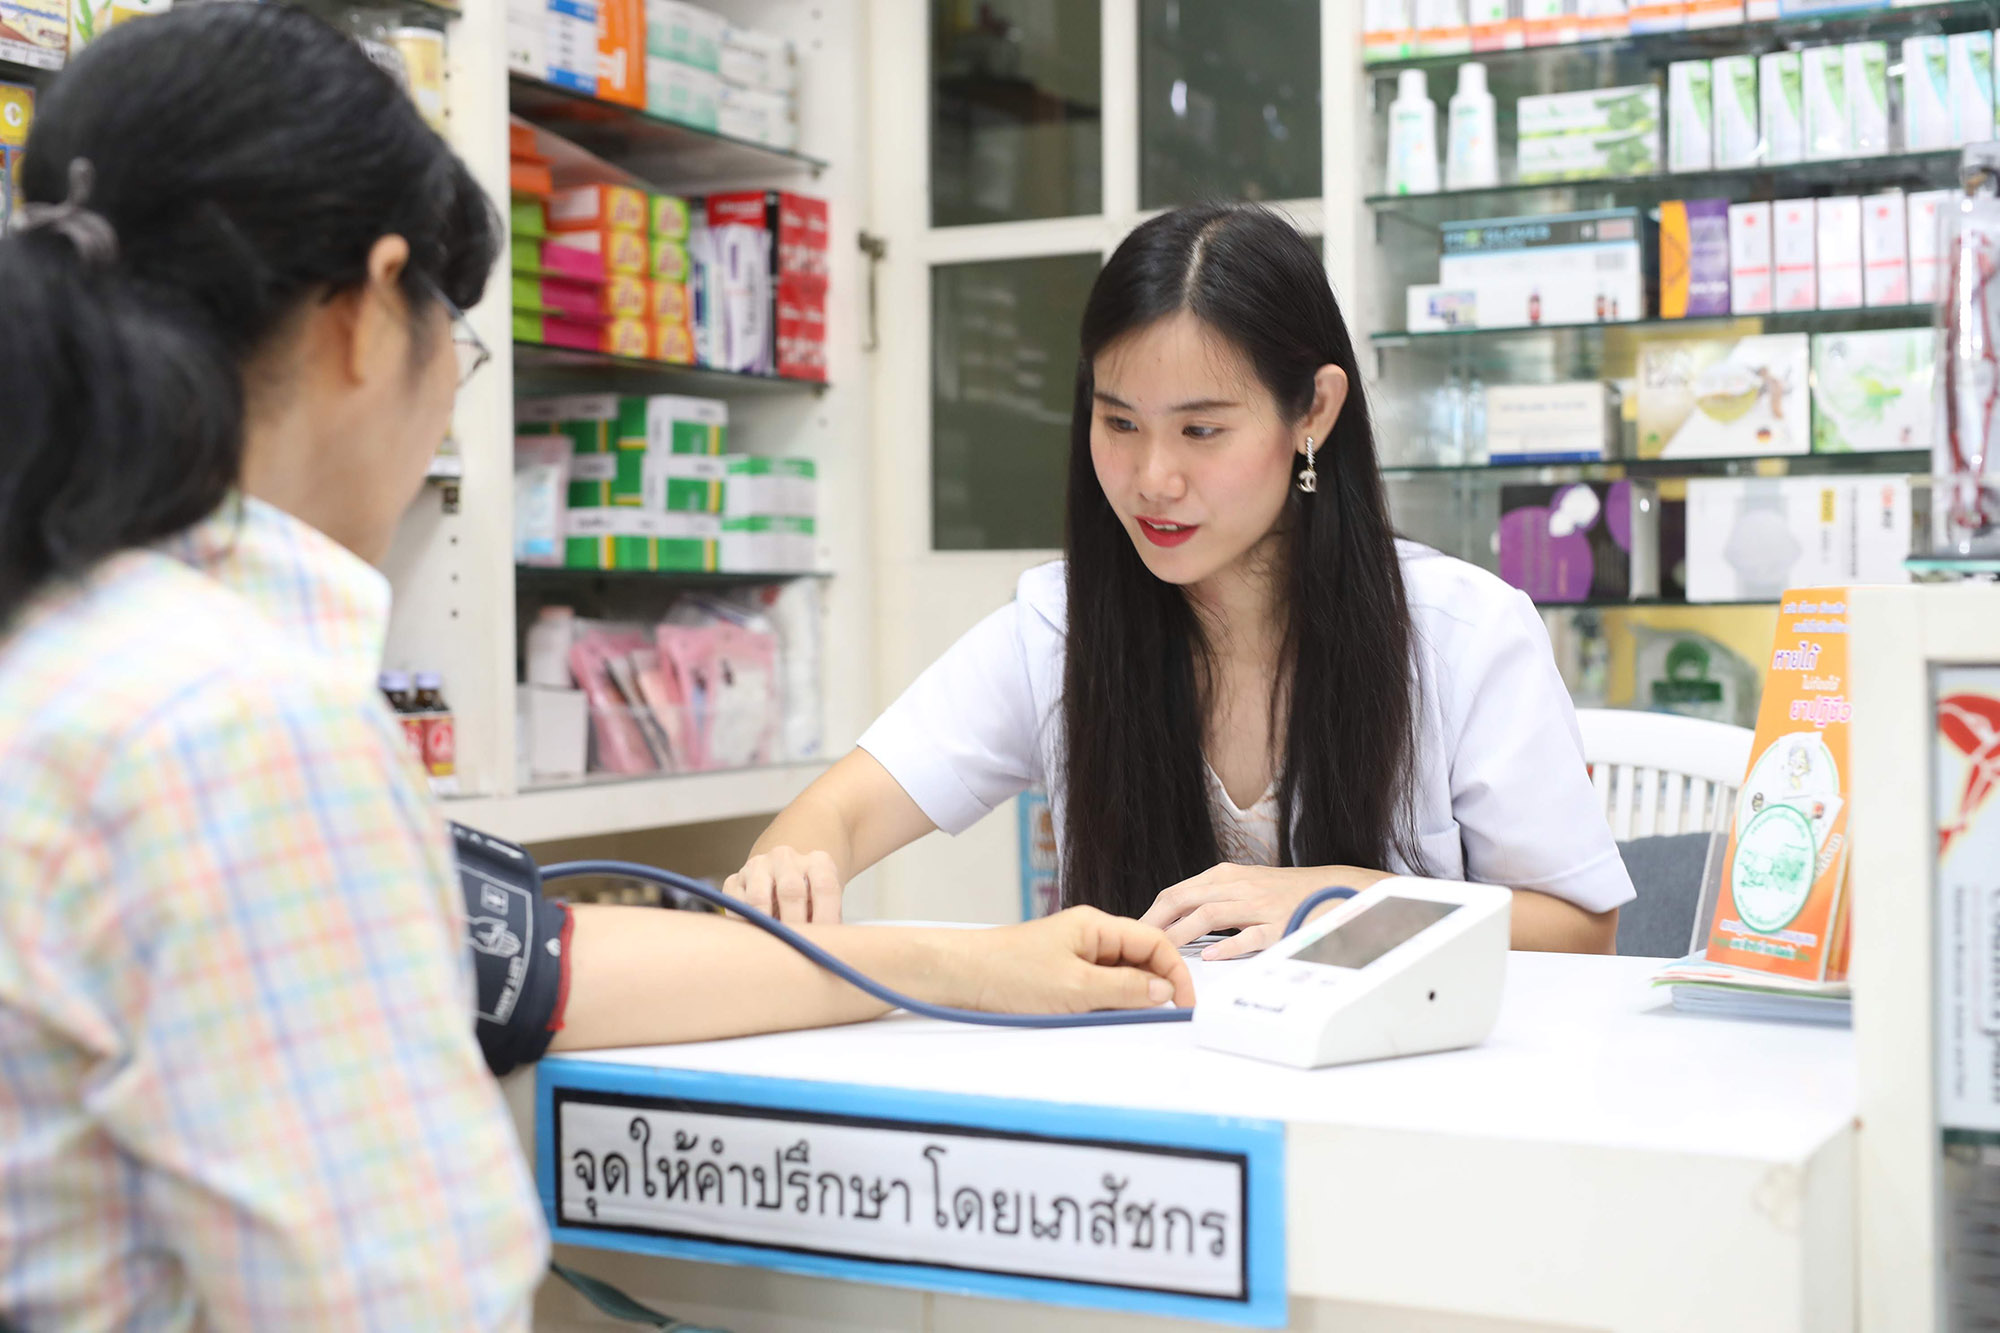 Six health benefits offered at pharmacies 